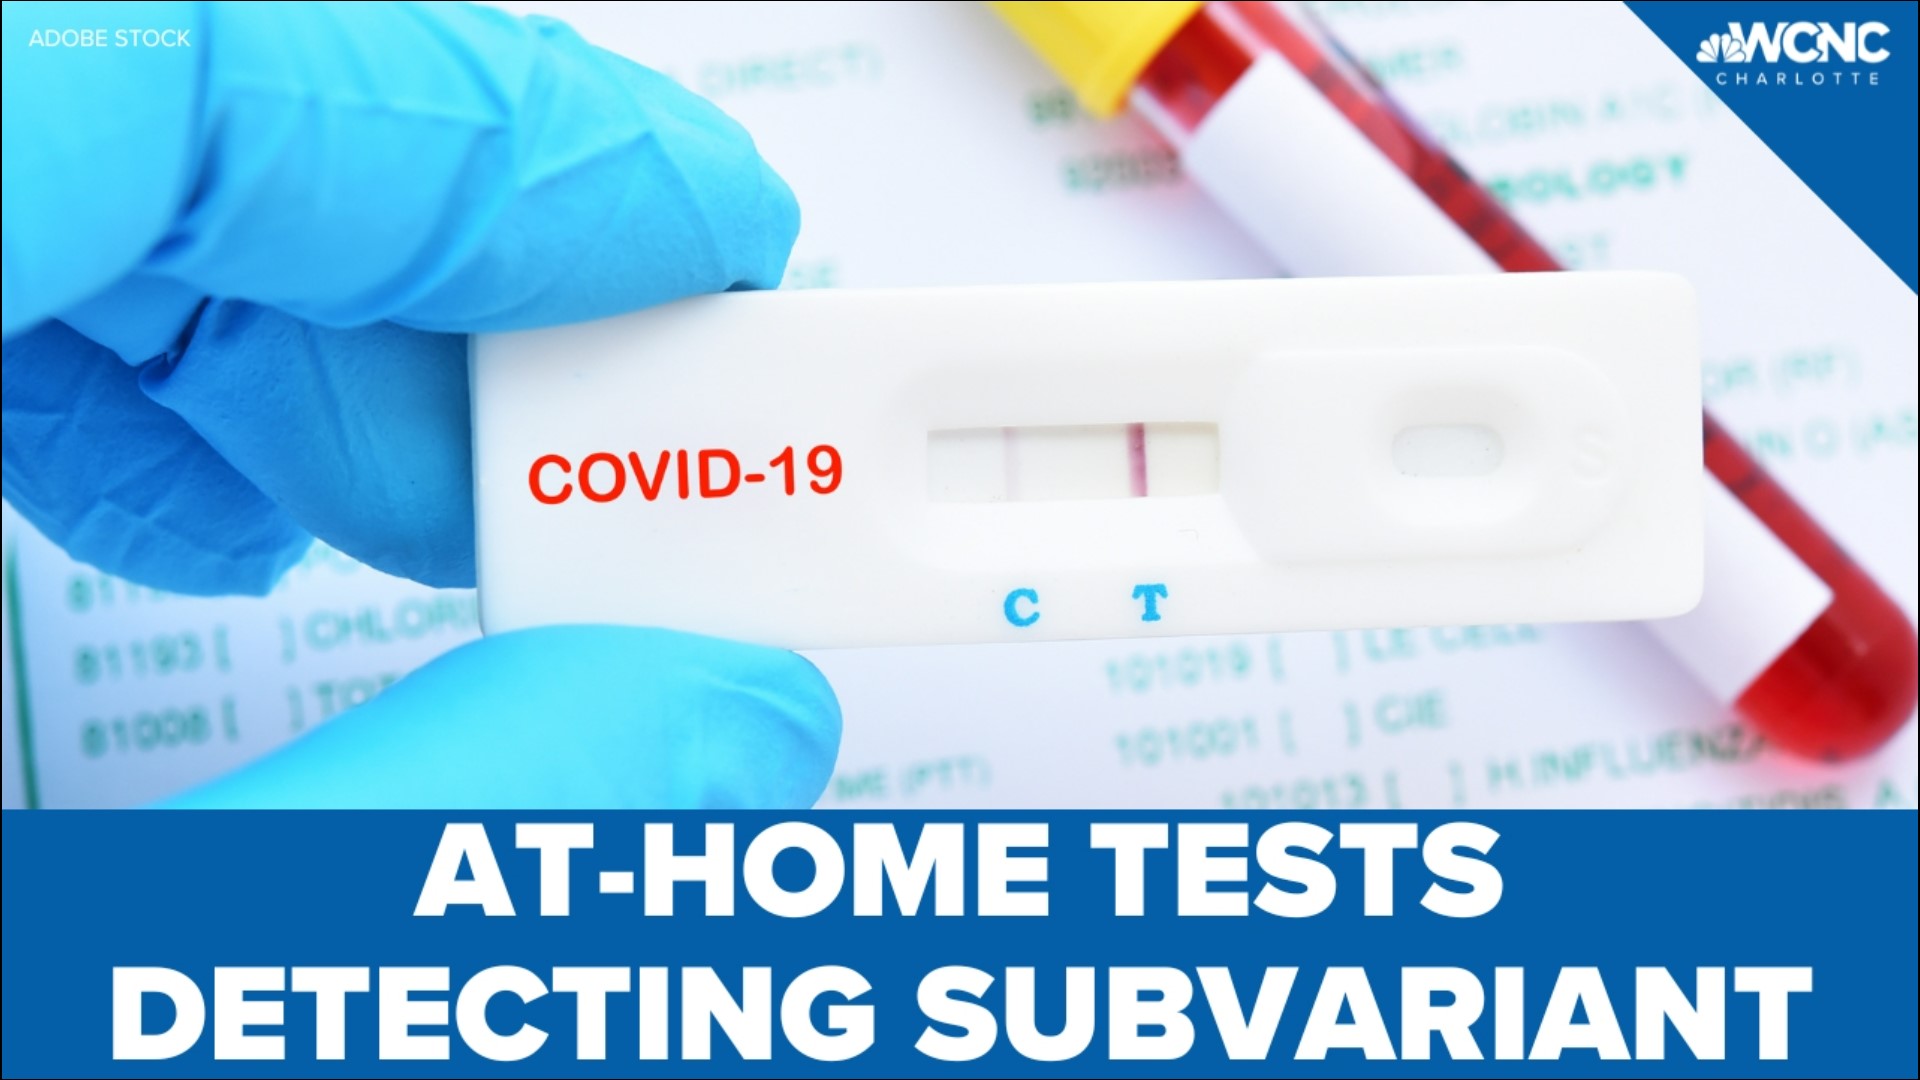 The WCNC Charlotte VERIFY team looked into recent reports of people testing negative for COVID-19 at home, then testing positive at the doctor's office.